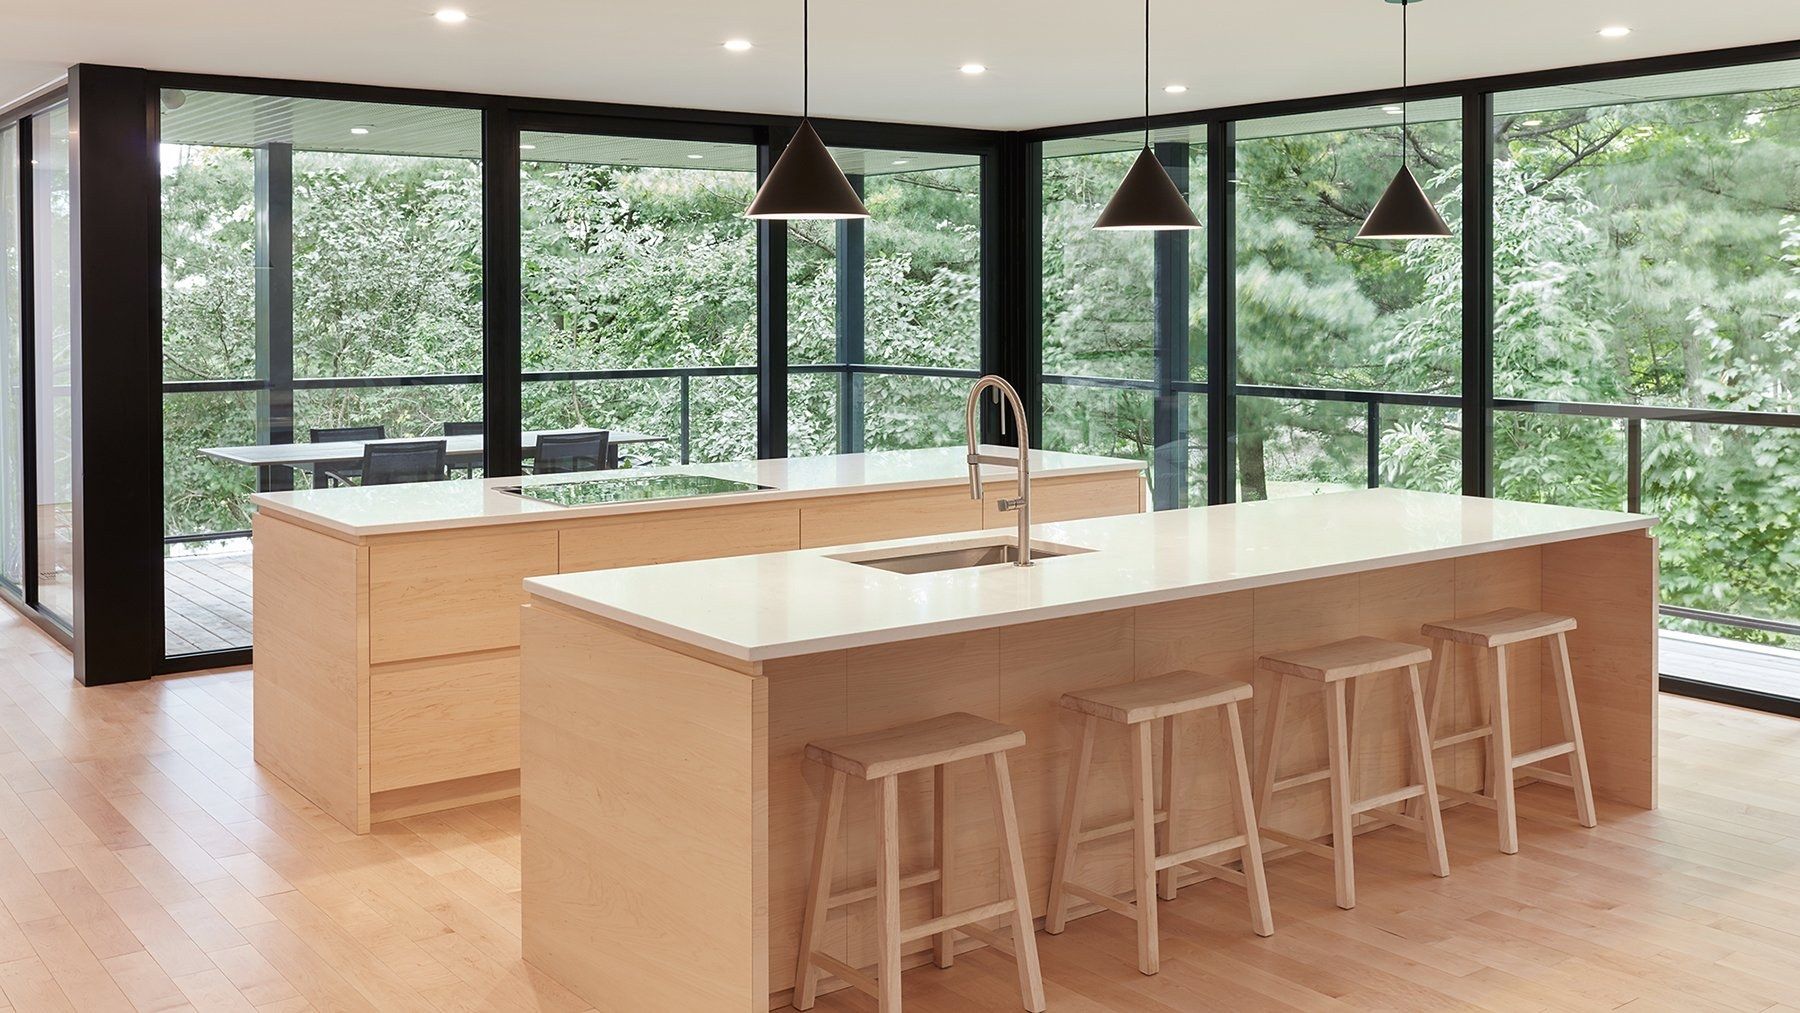 5 tips for reducing the environmental impact of a new kitchen